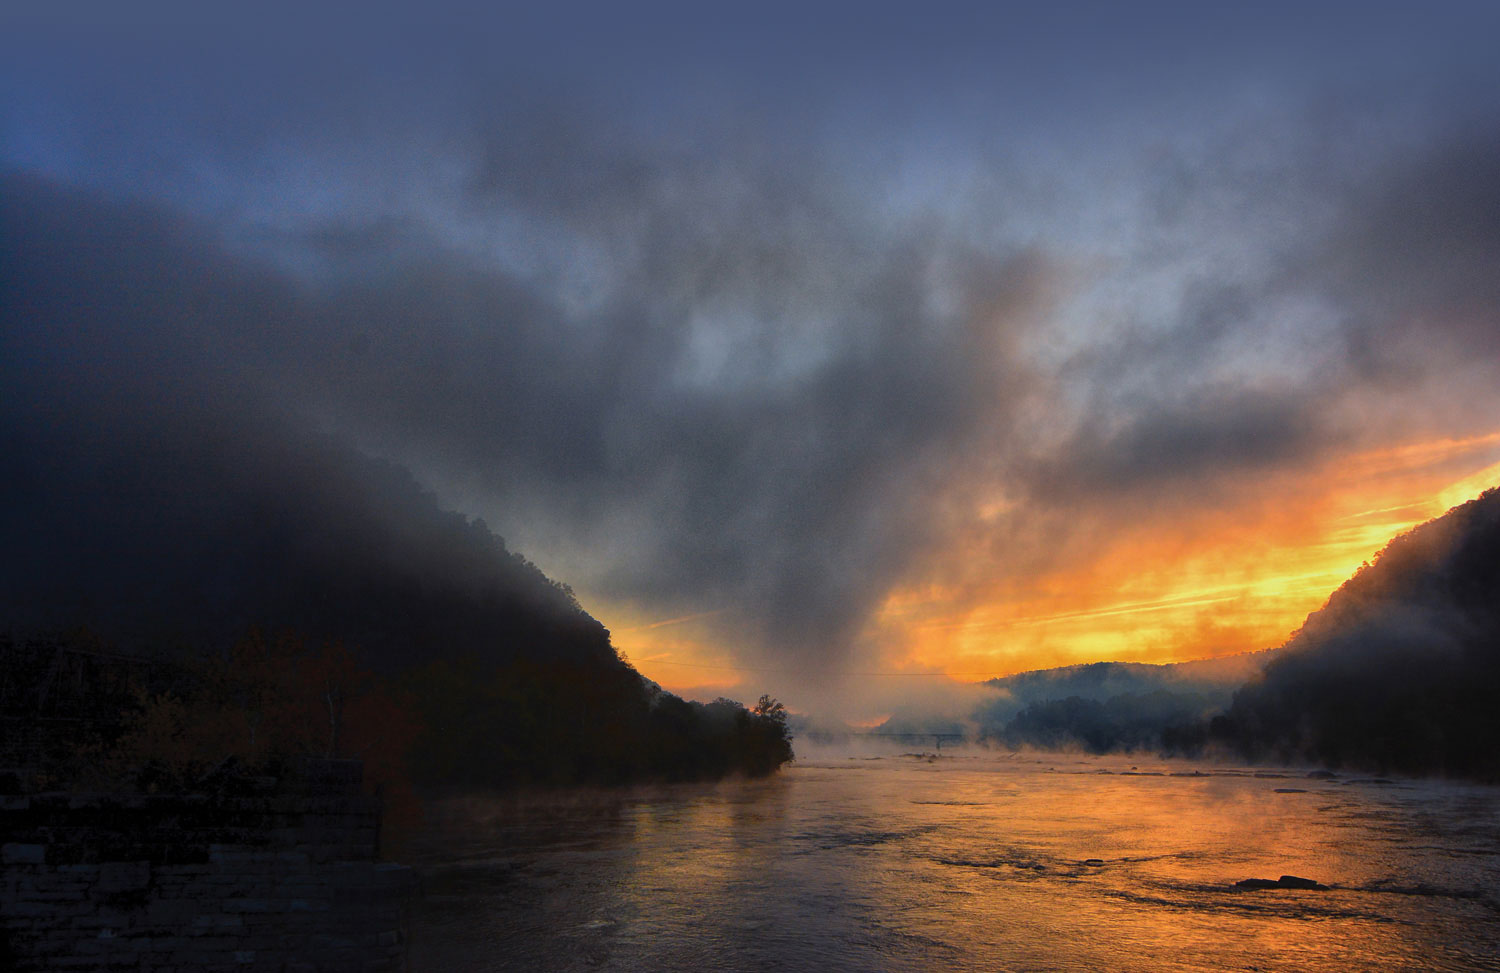 Sunrise over the Shenandoah and Potomac rivers – Harpers Ferry, West Virginia